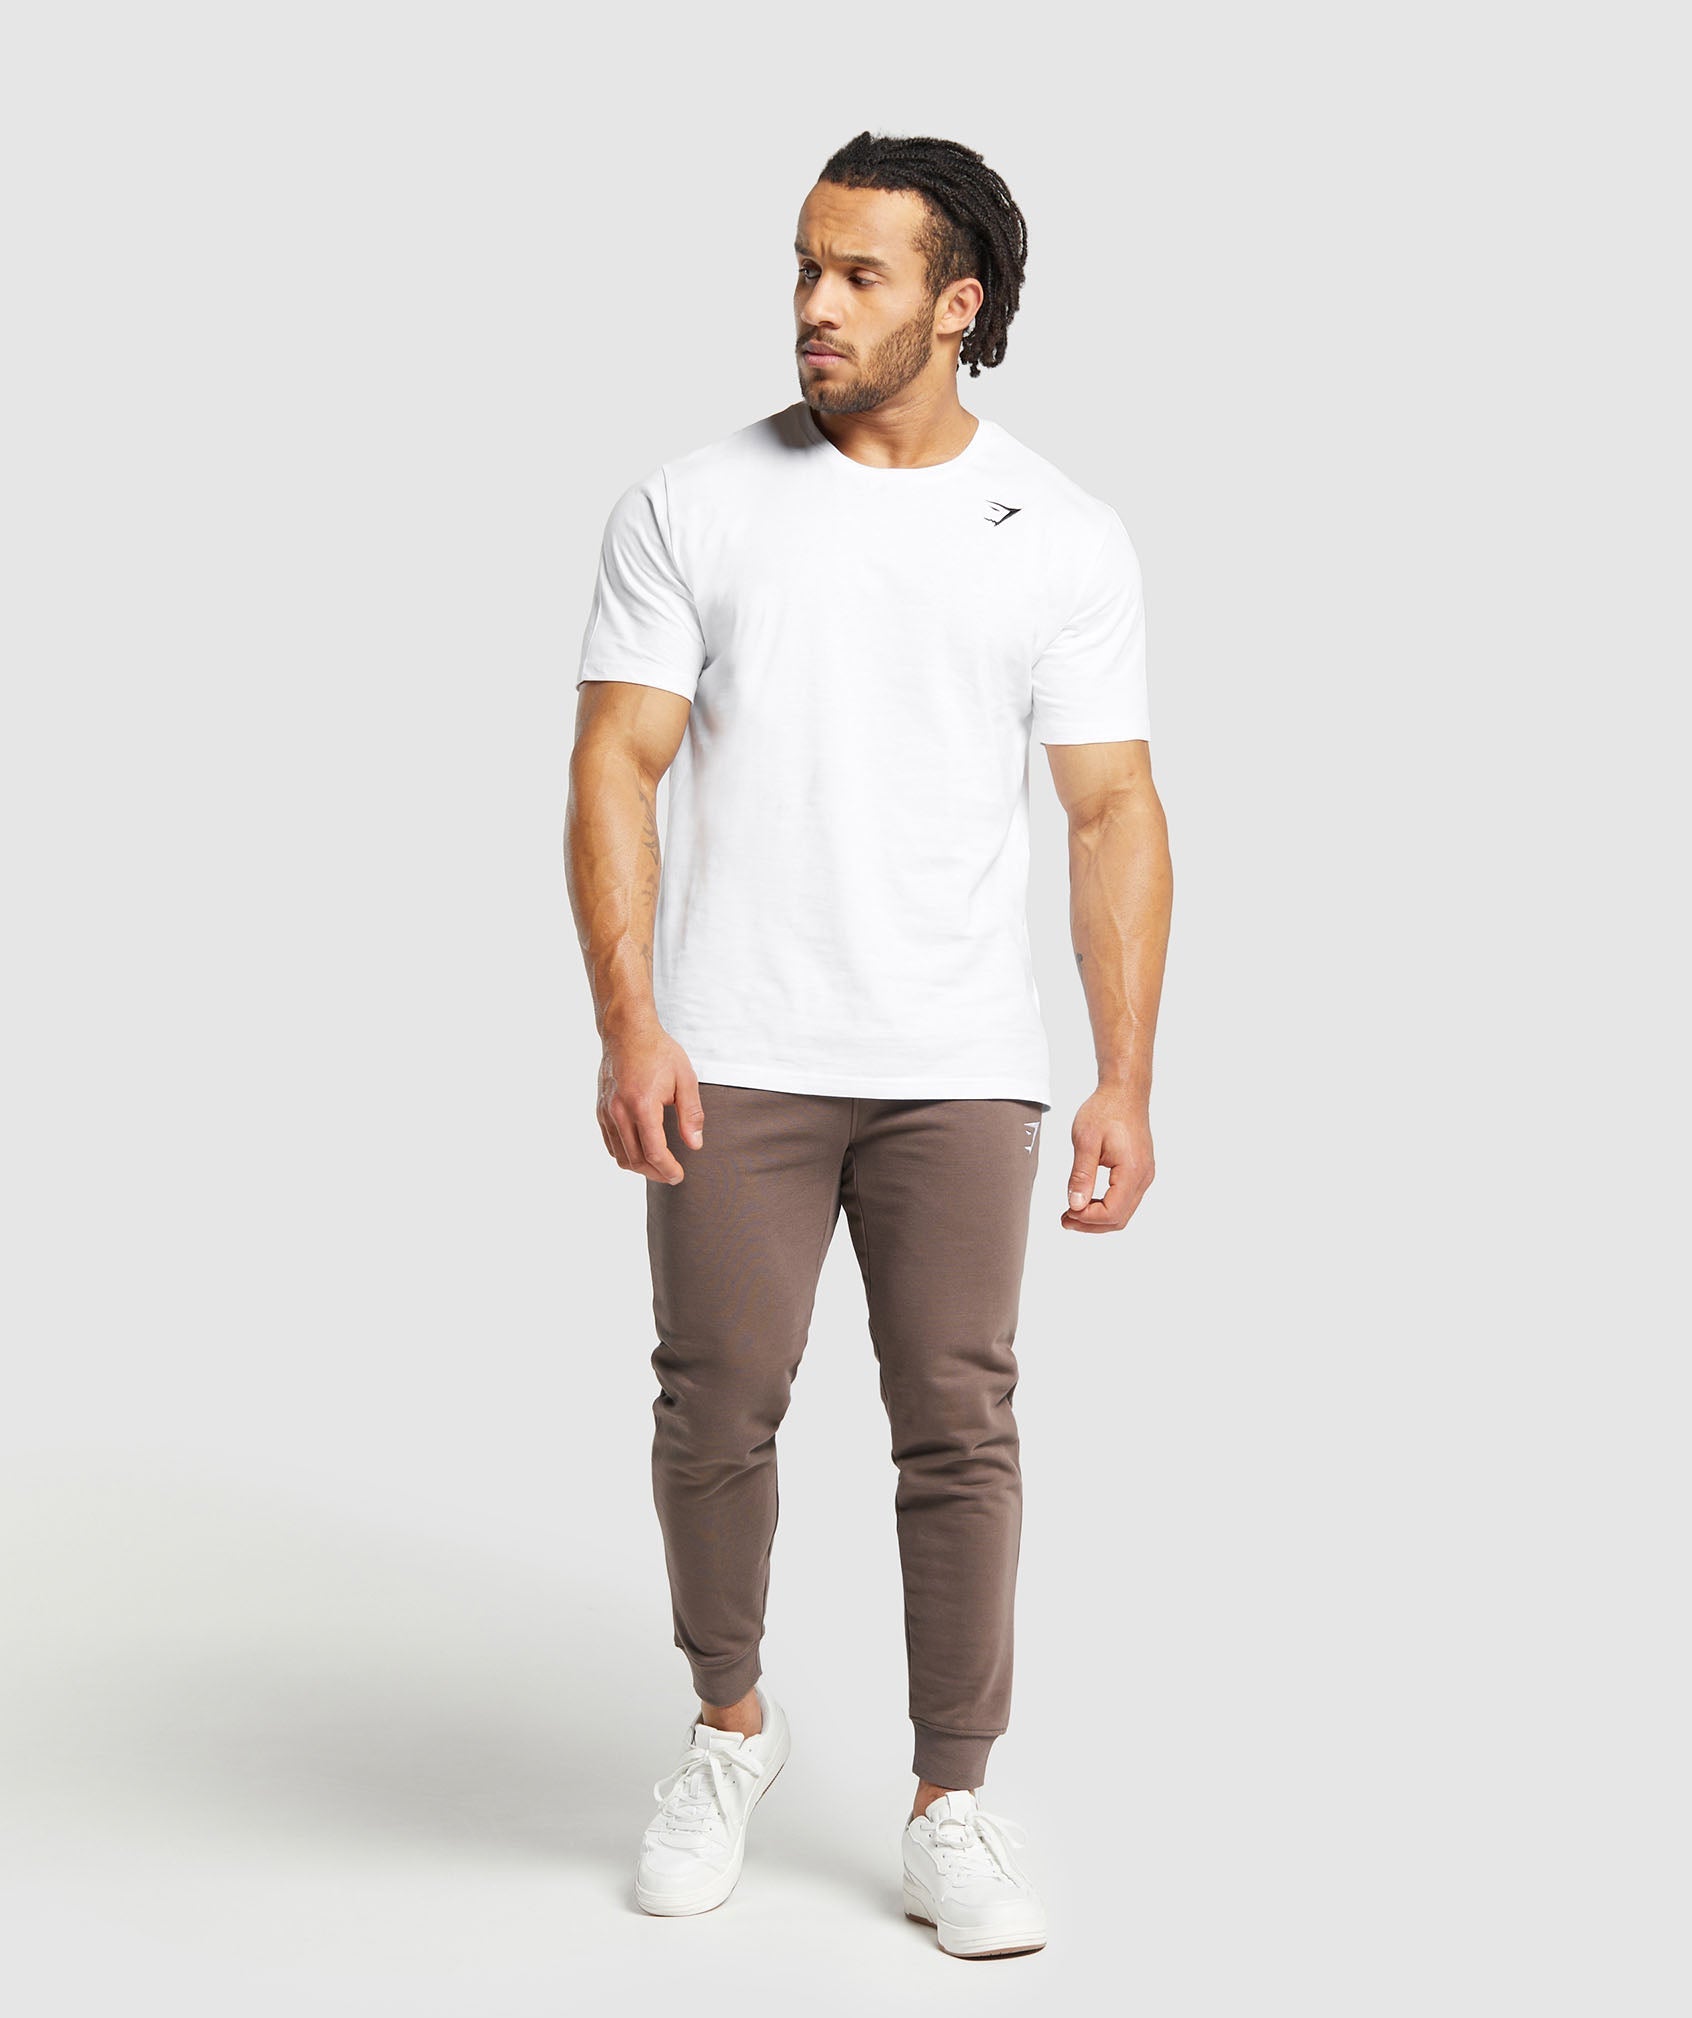 Crest Joggers in Truffle Brown - view 3